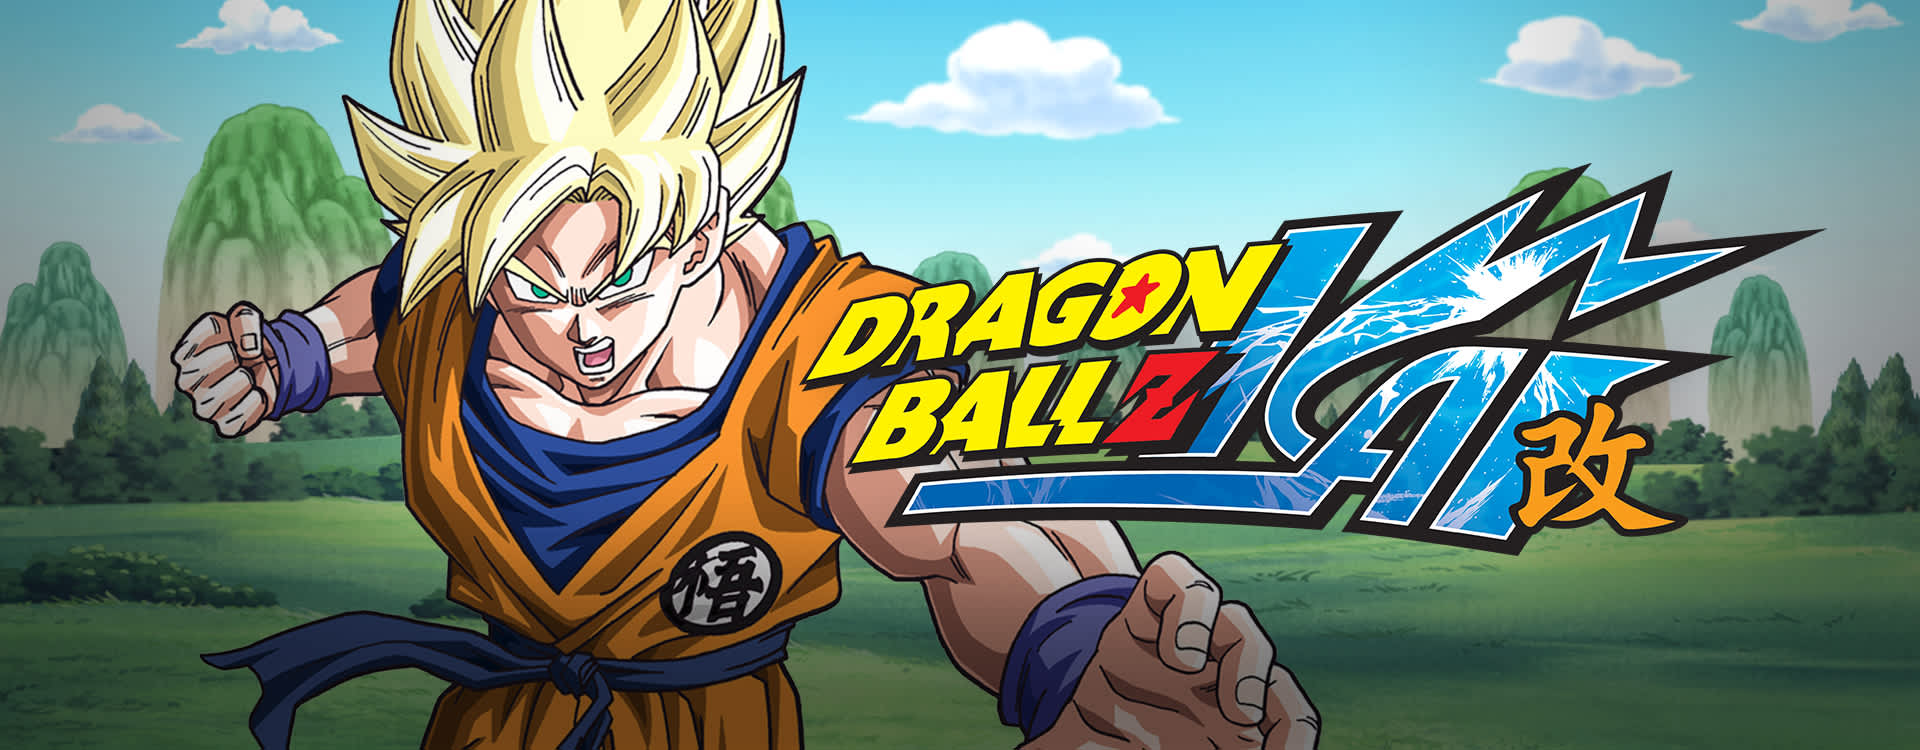 Should Dragonball Z Be Remade? If So, Who Should Animate It? : r/dbz